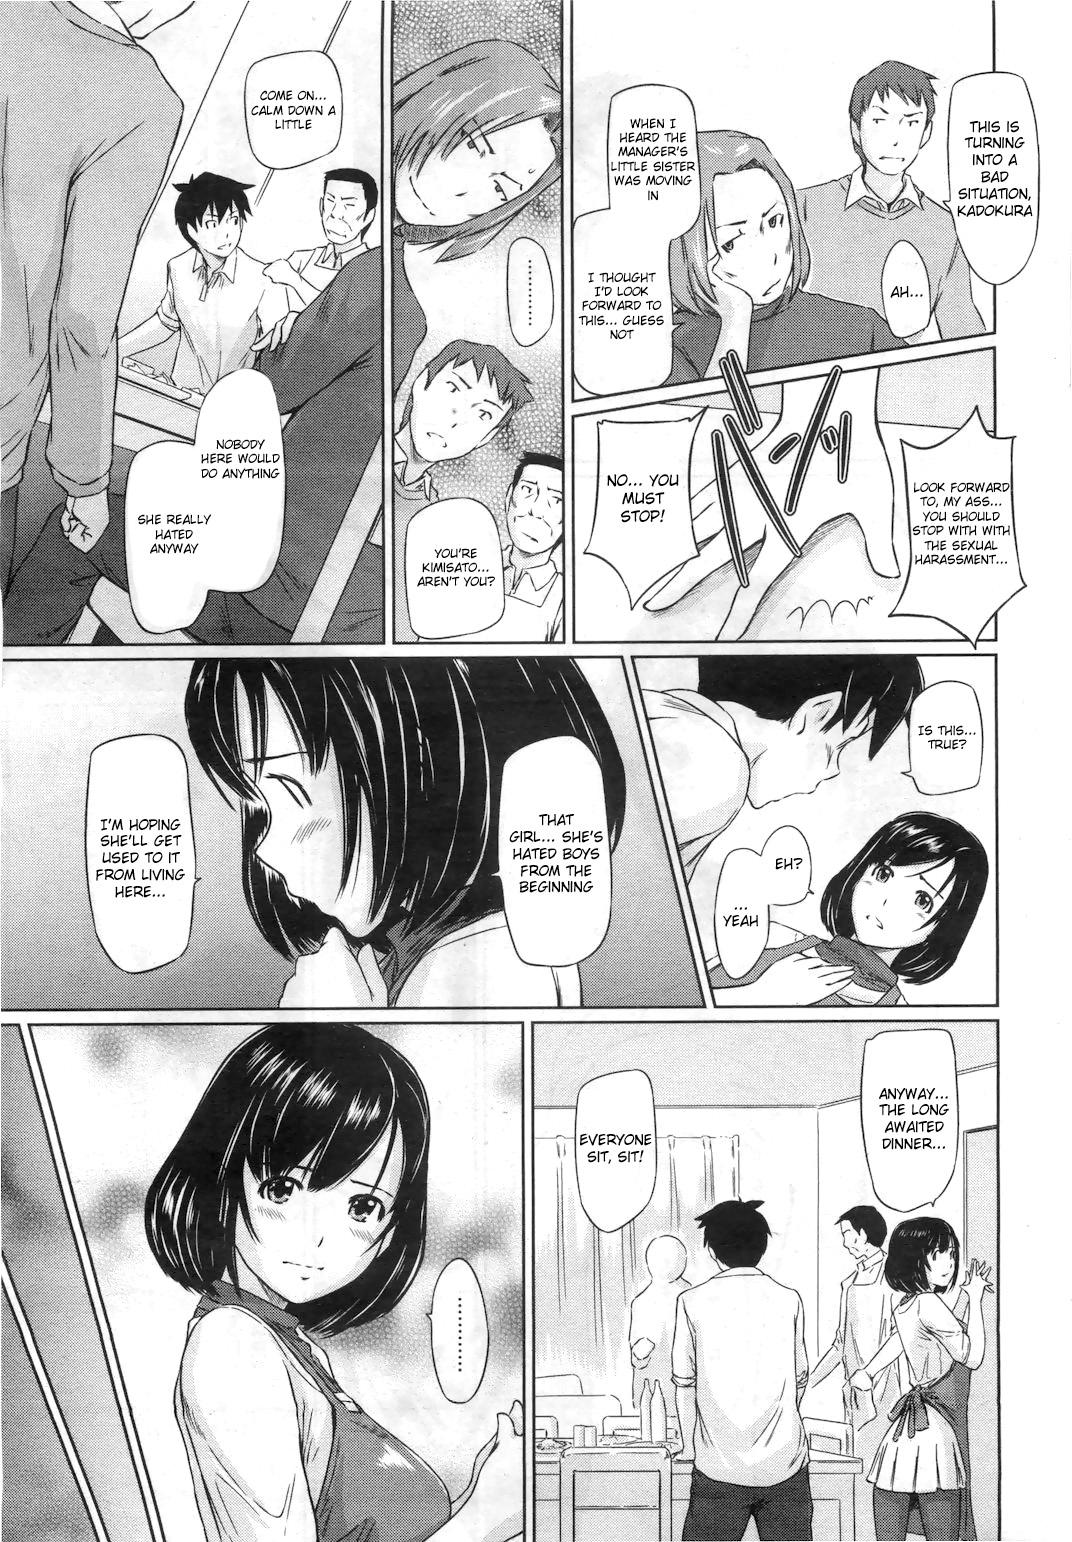 Teen Blowjob Welcome to Tokoharusou Chapter 1 Stepdaughter - Page 7